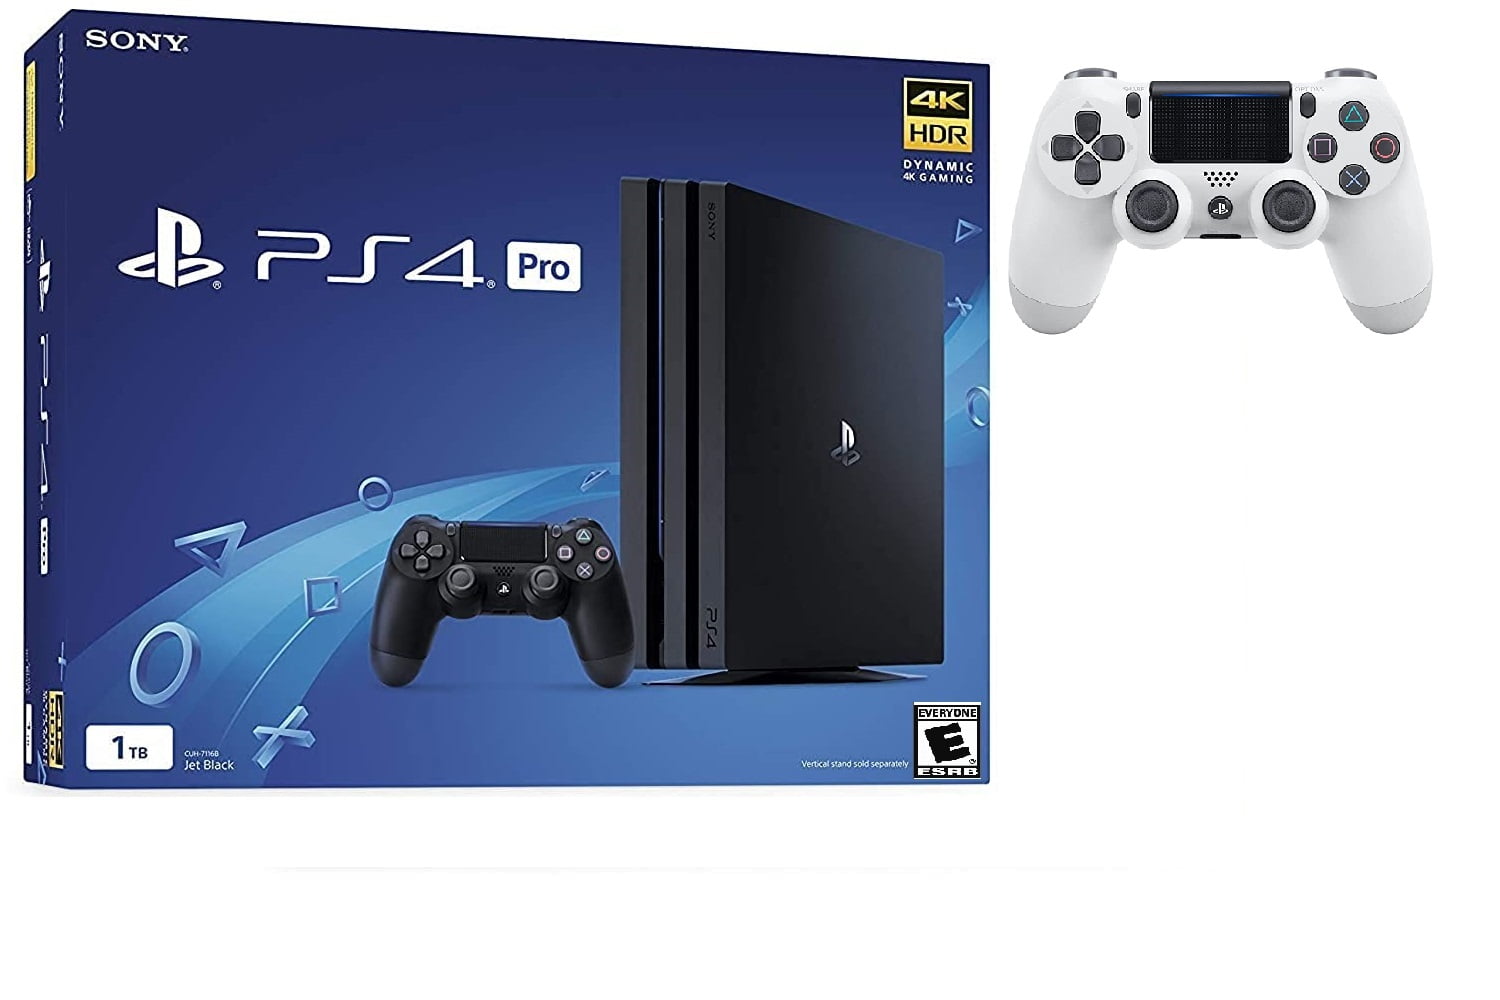 PS4 Pro in PlayStation 4 Consoles, Games, Controllers + More